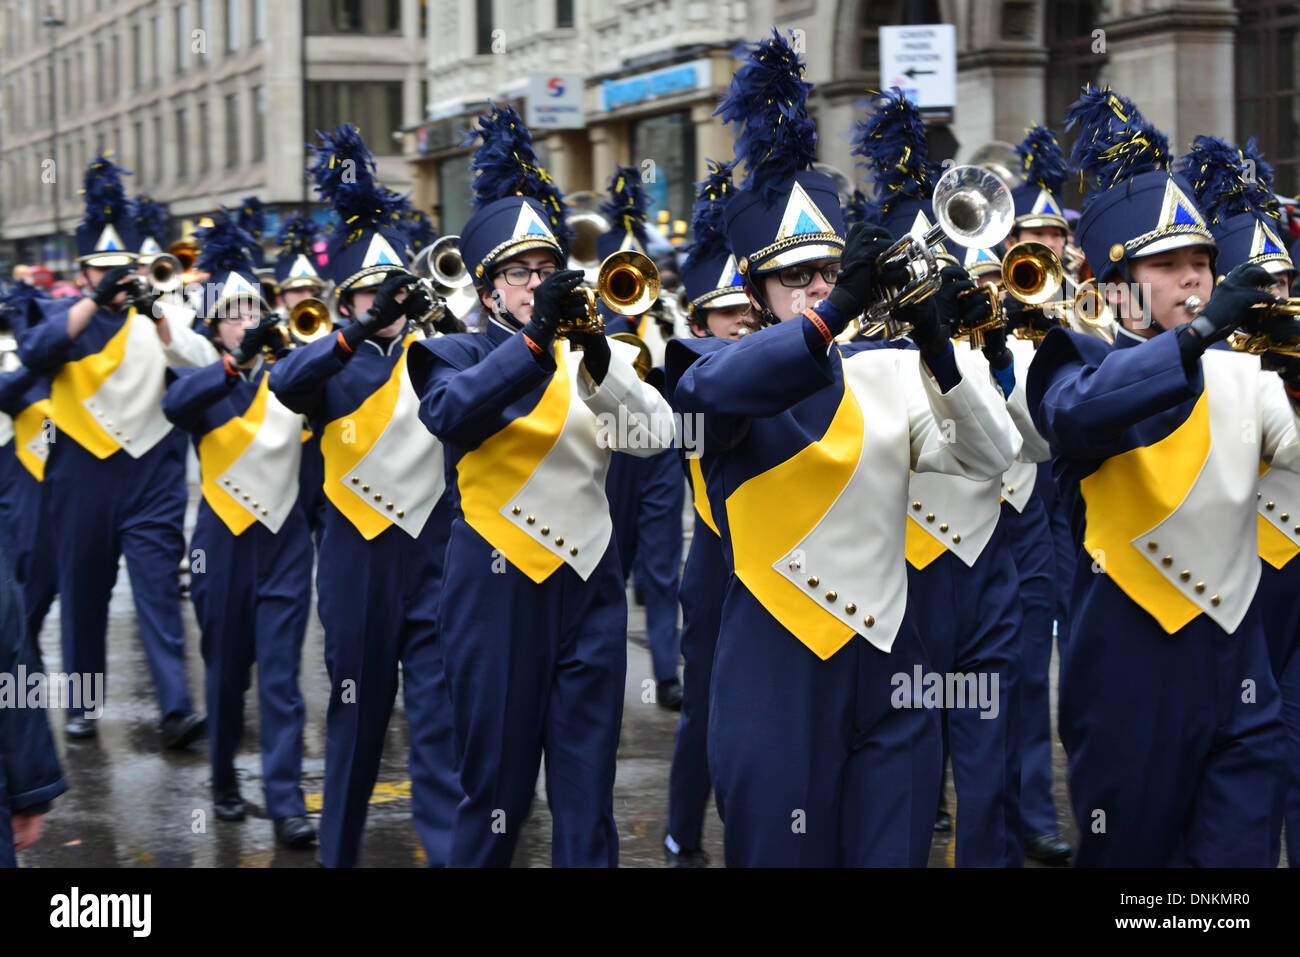 London, UK. 1st January 2014. Tens of thousands of people braved dreadful weather in central London this afternoon for the capital's annual New Year's Day parade, January 1st 2014, Photo by See li/Alamy Live News Stock Photo